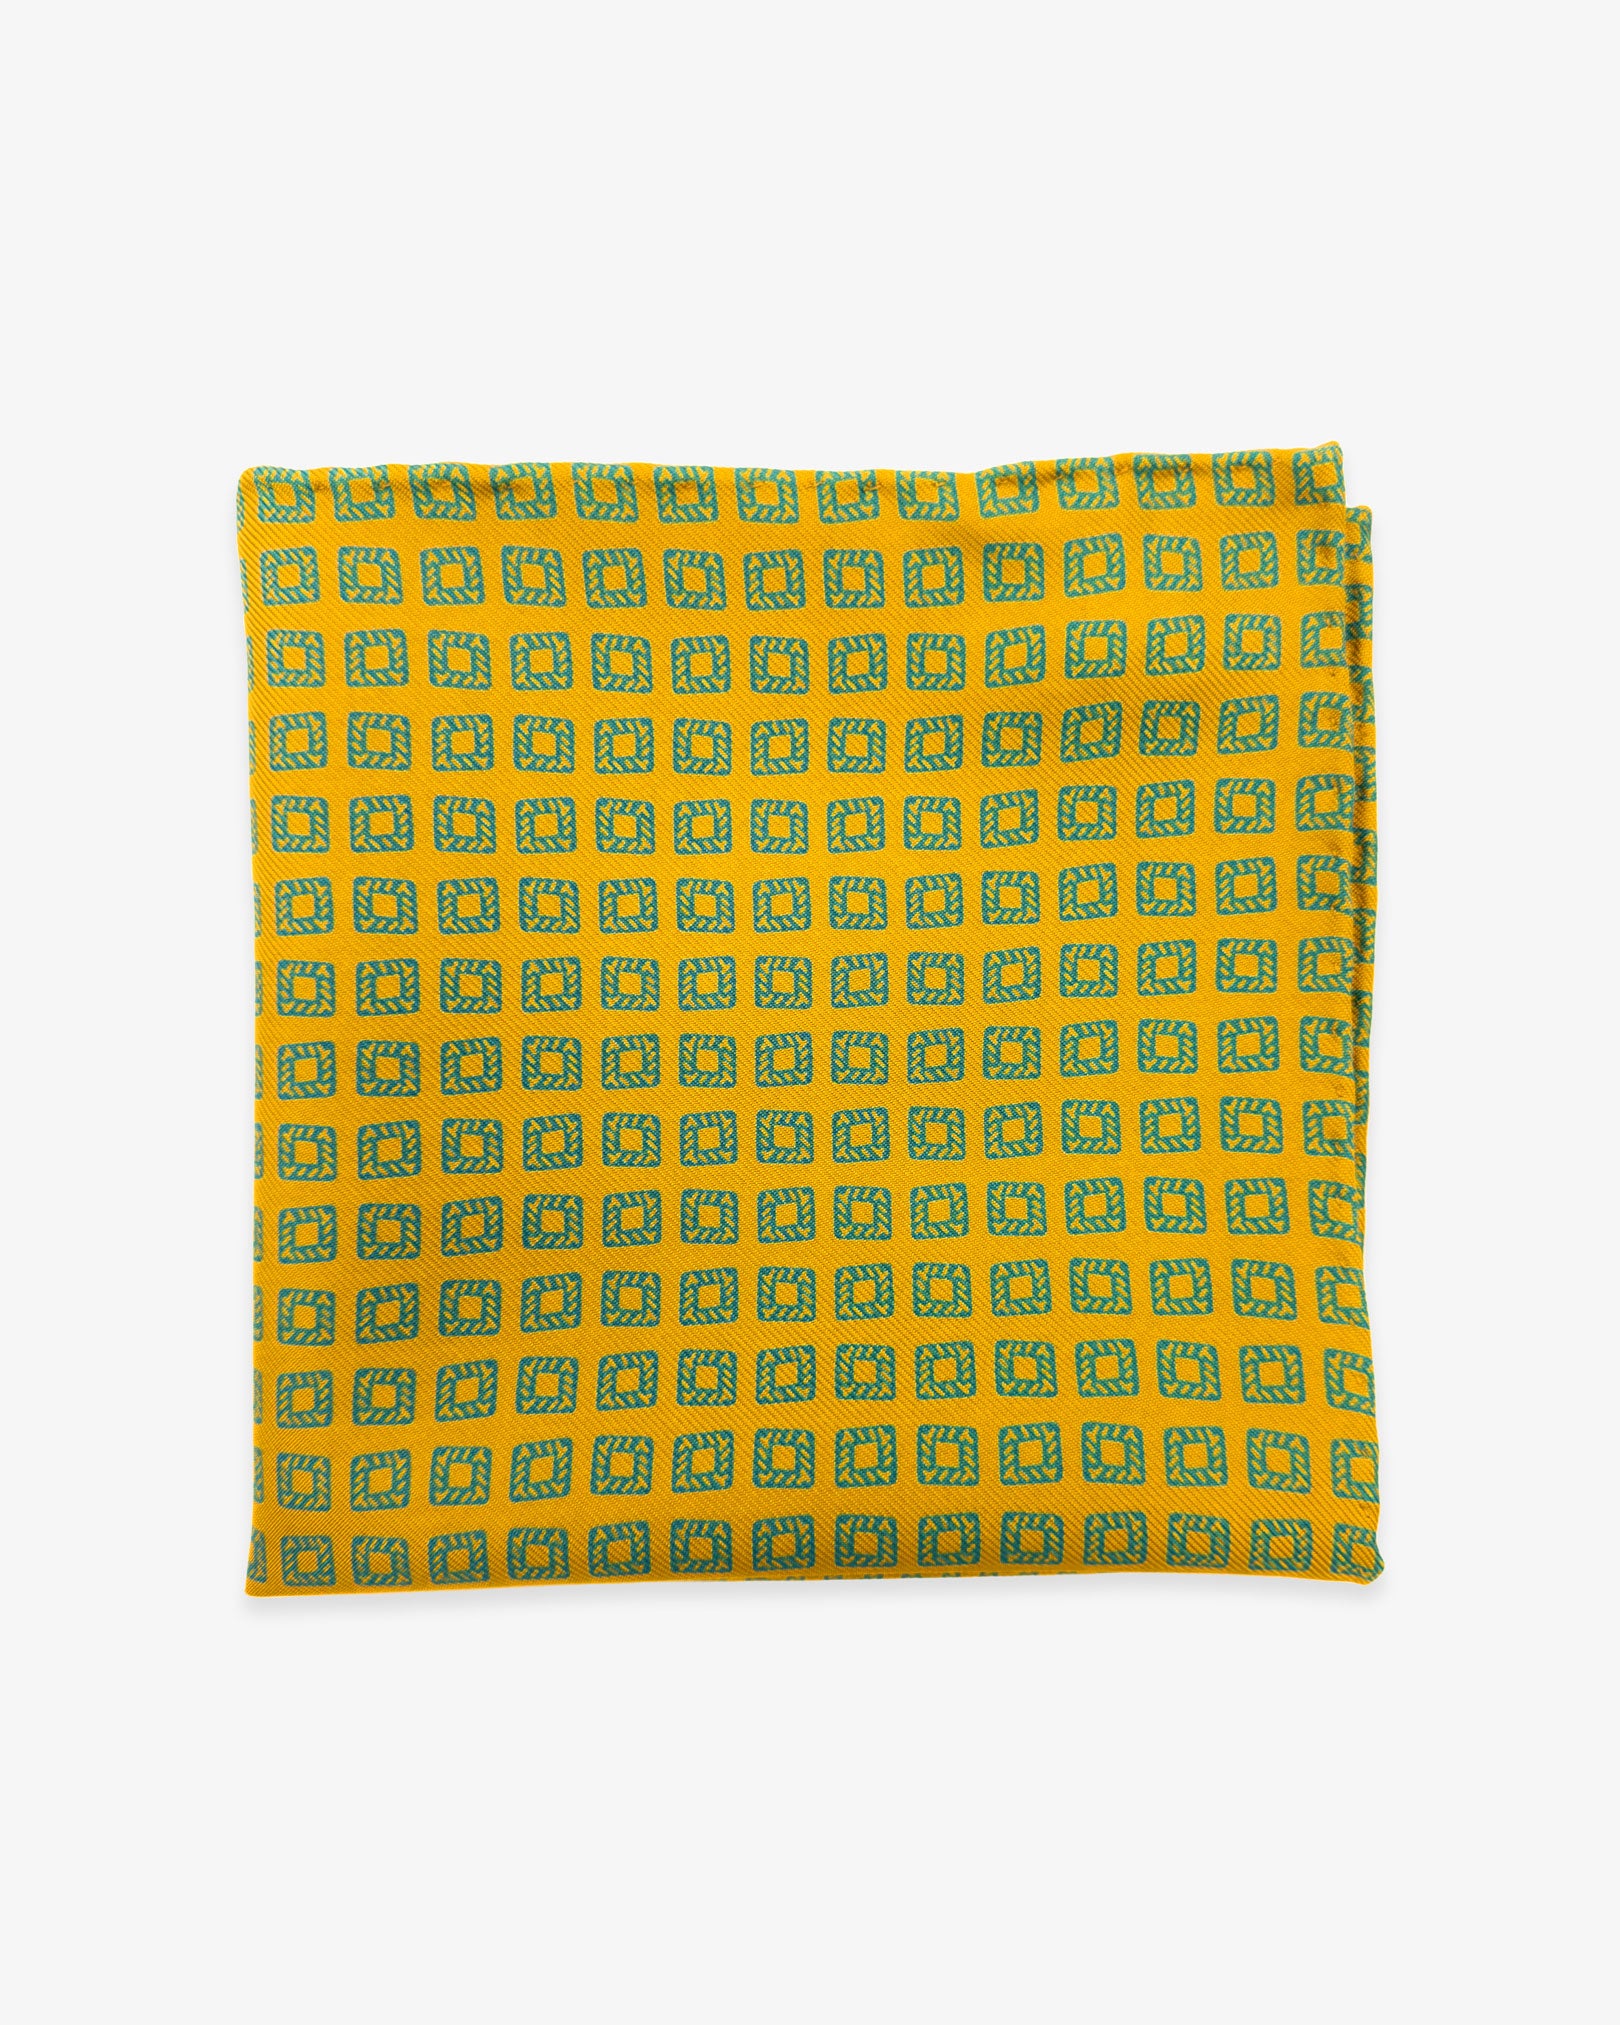 The 'Dover' silk pocket square from SOHO Scarves UK collection. Folded into a quarter, showing the individual blue squares against a gold background.